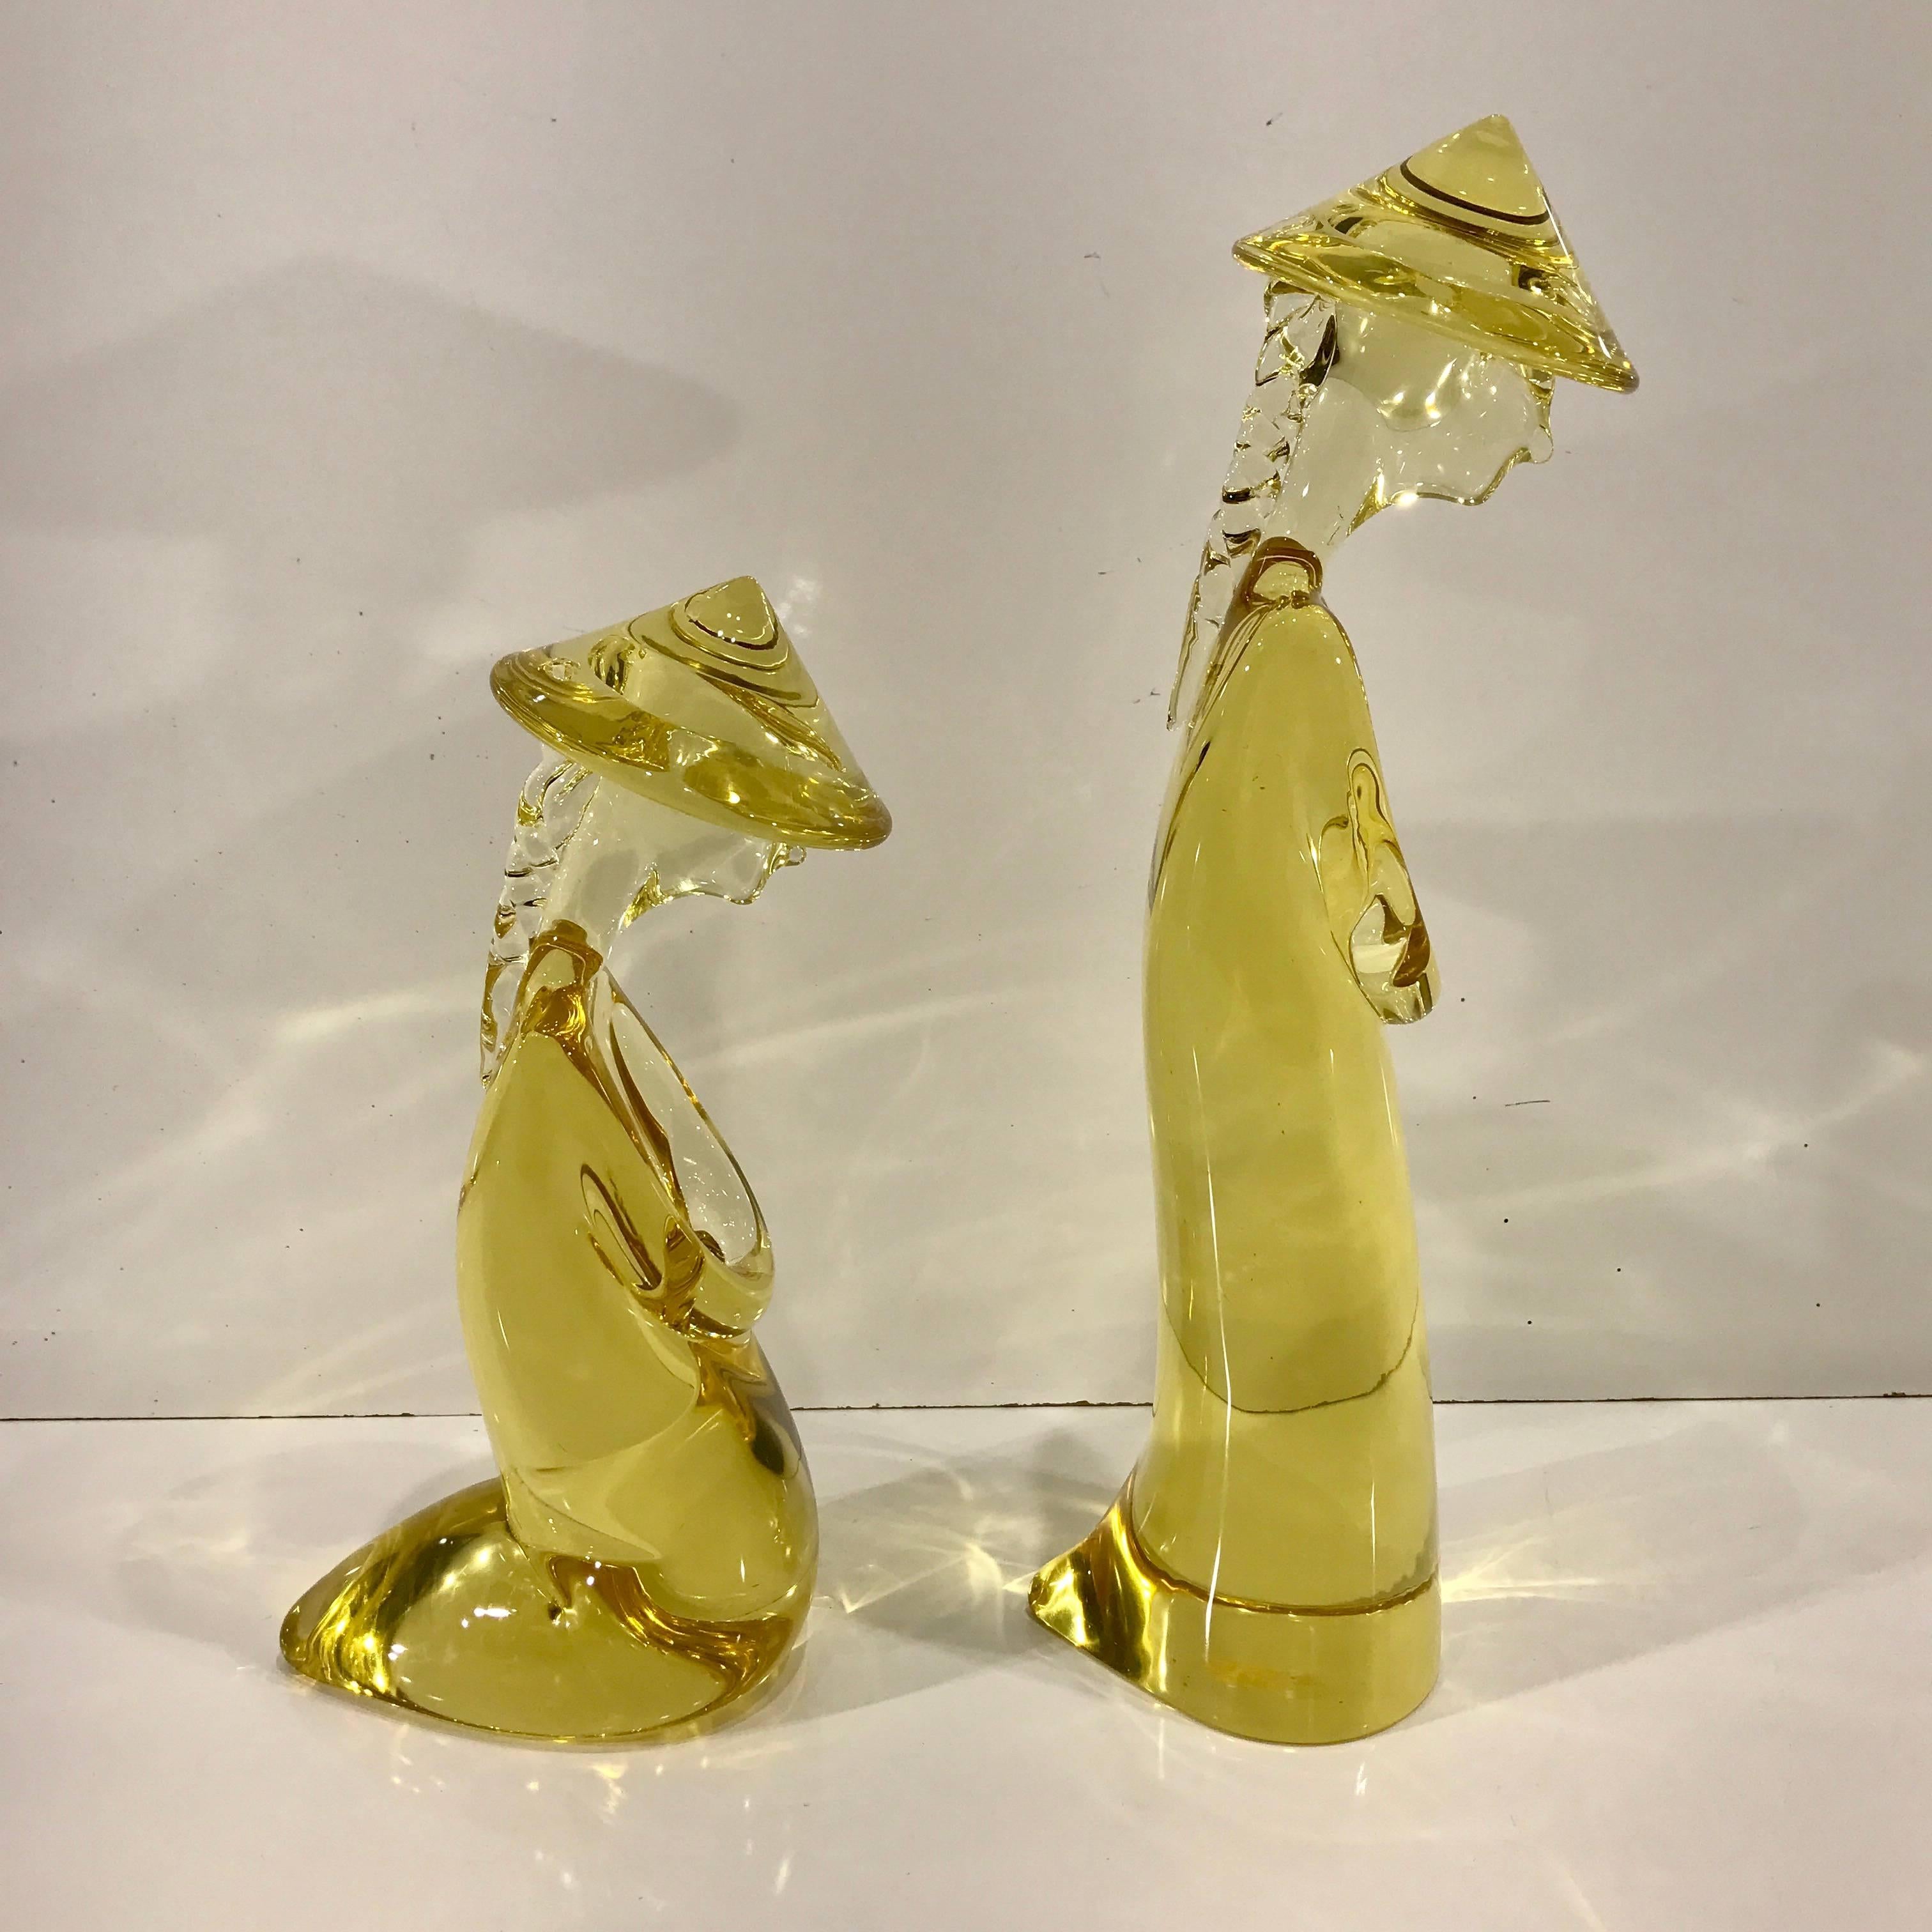 A pair of Murano glass Chinese figures, attributed to Pino Signoretto, Each one in a rare color of a yellow diamond. One standing, and one kneeling, both have subtle details as hats, pig tails, folded arms. Not marked, residue of a vintage Murano